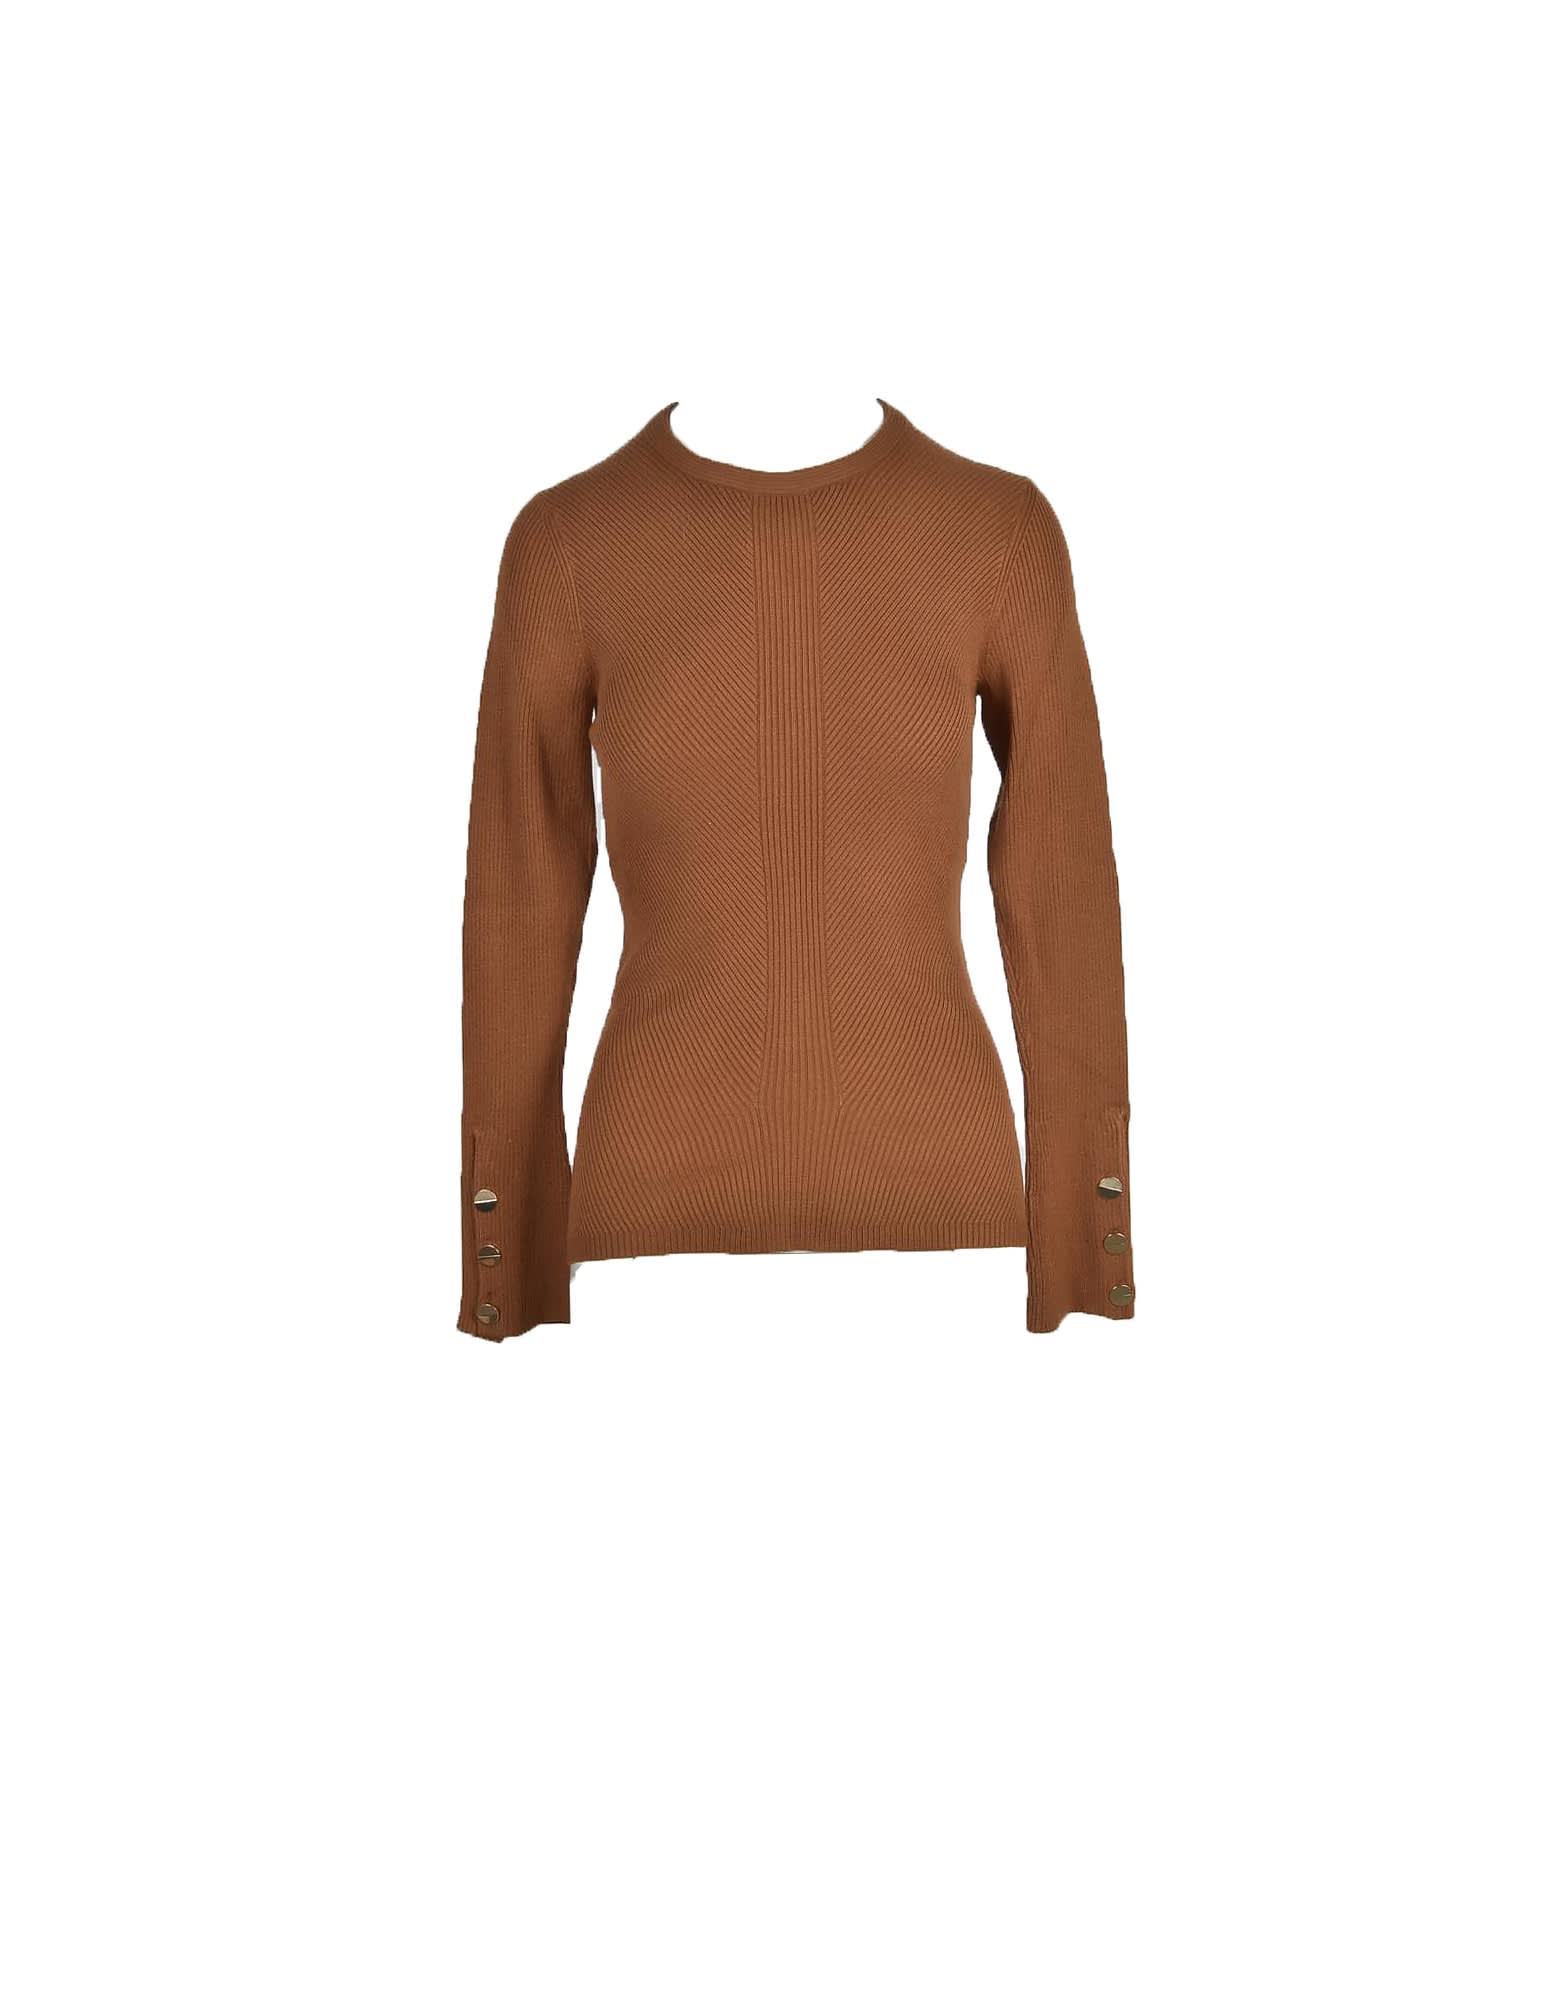 Guess Womens Brown Sweater